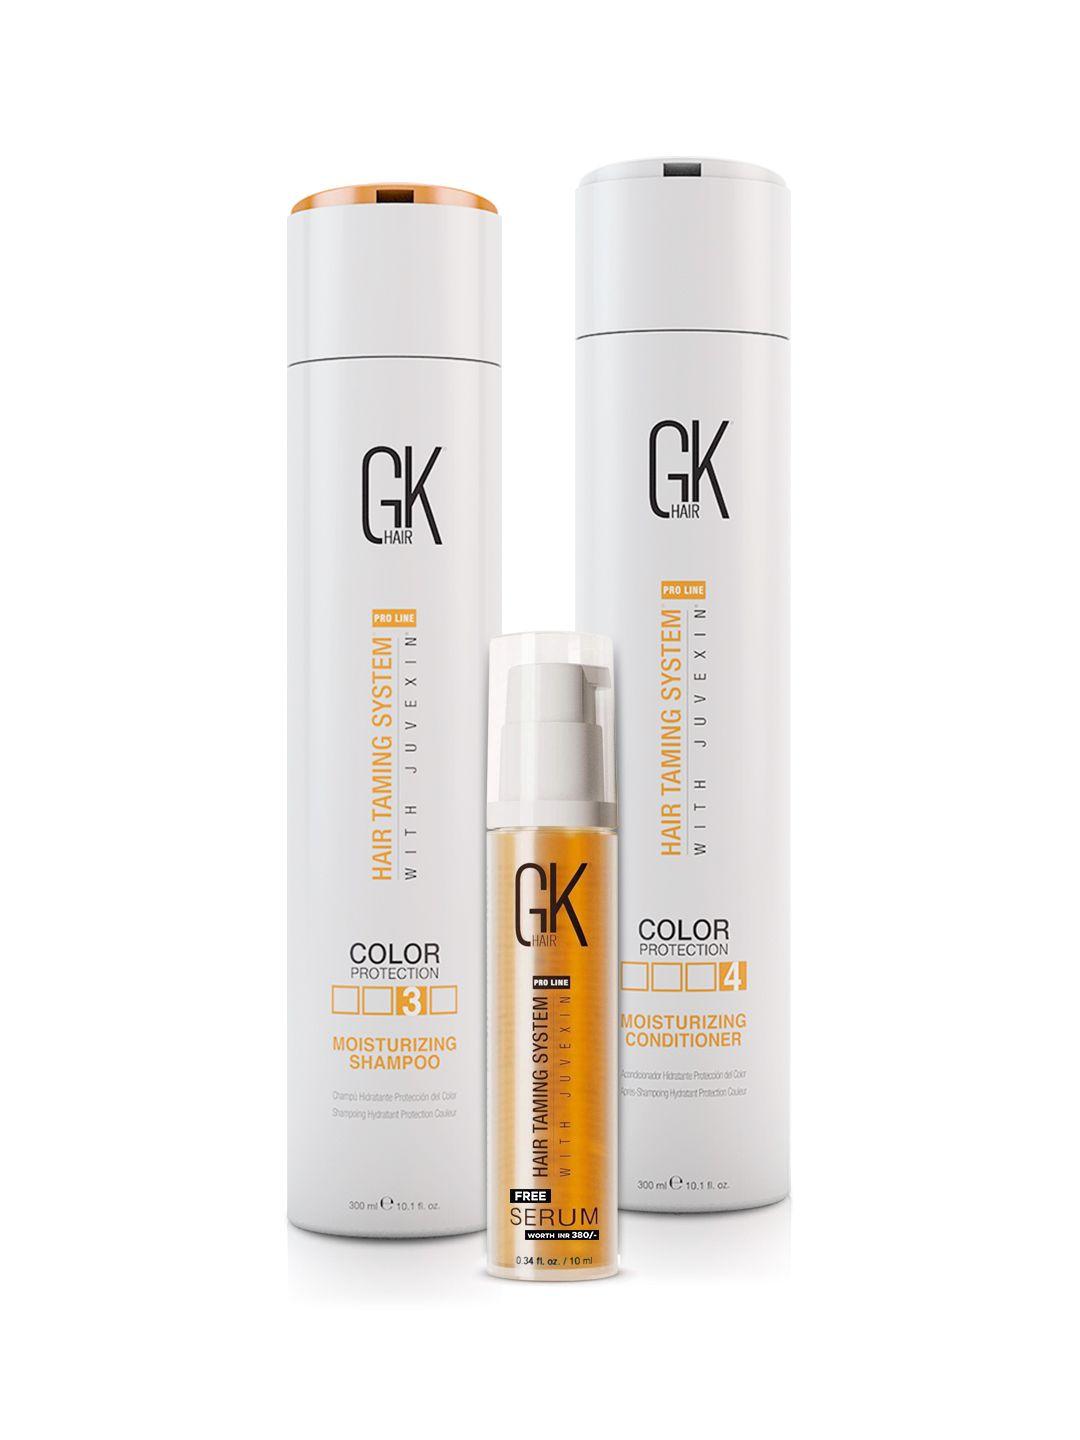 gk hair set of hair taming system pro line global keratin shampoo & conditioner with serum